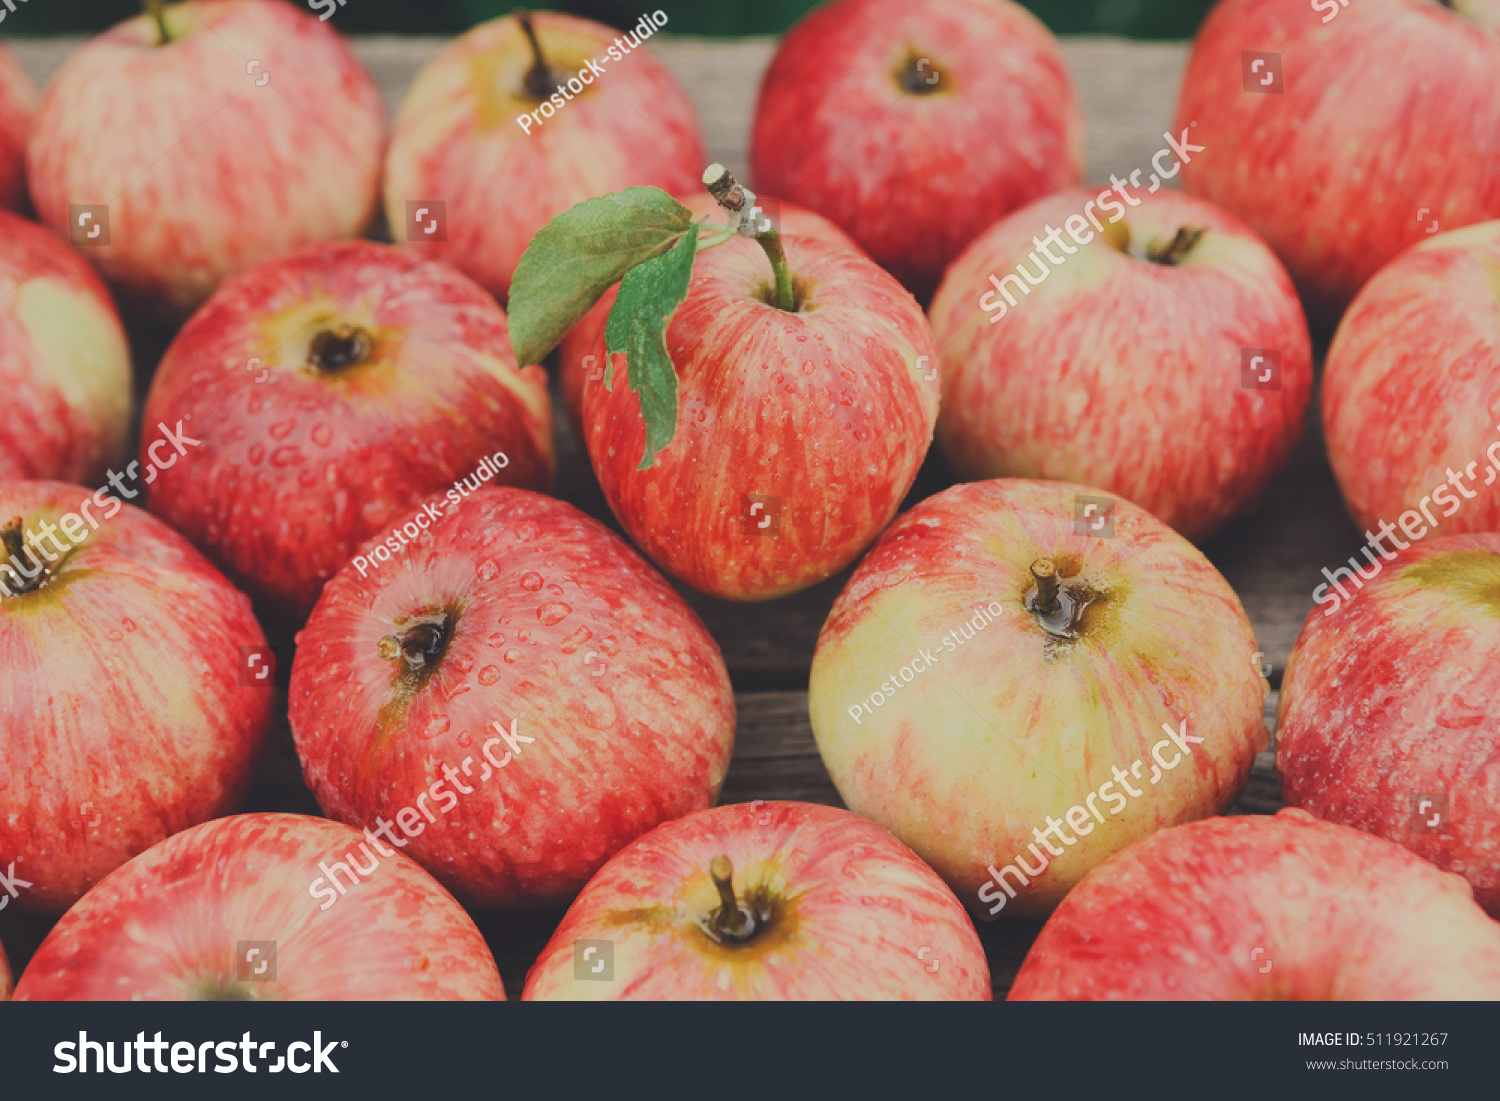 Sweet fresh ripe red apples heap scattered on gray weathered wood closeup, fruit background. Healthy food on table. Fall harvest, farming agricultural concept #511921267